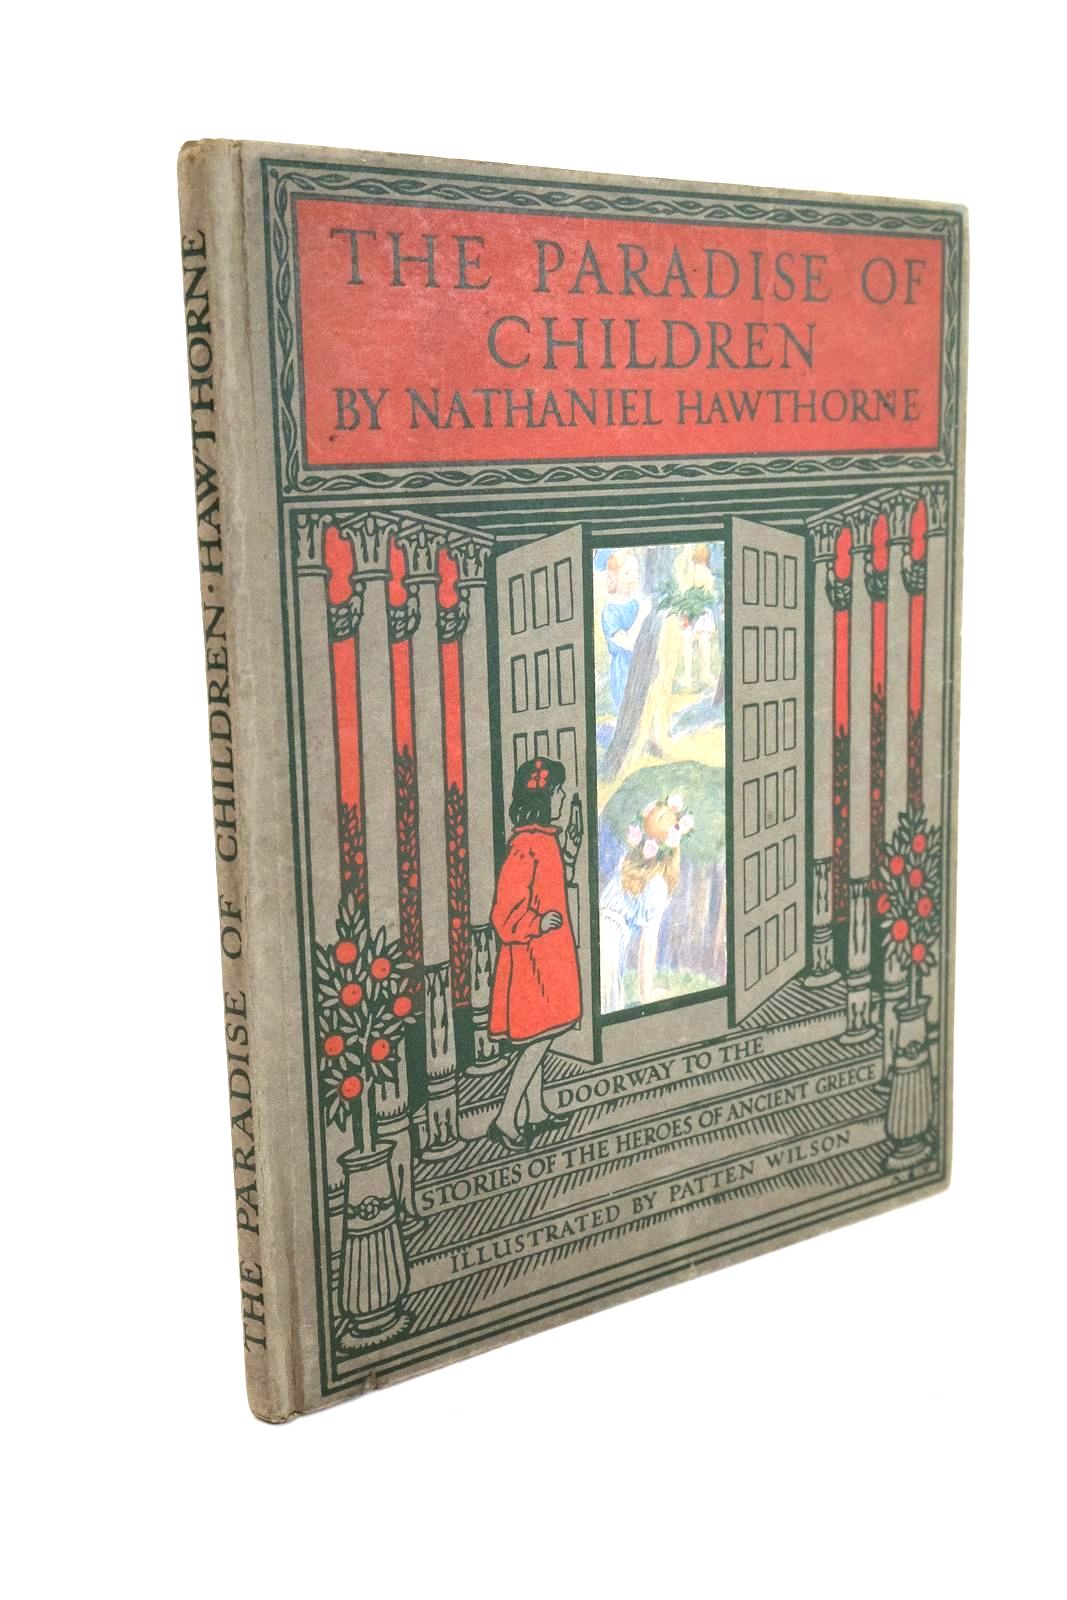 Photo of THE PARADISE OF CHILDREN written by Hawthorne, Nathaniel illustrated by Wilson, Patten published by Constable and Company Ltd. (STOCK CODE: 1325079)  for sale by Stella & Rose's Books